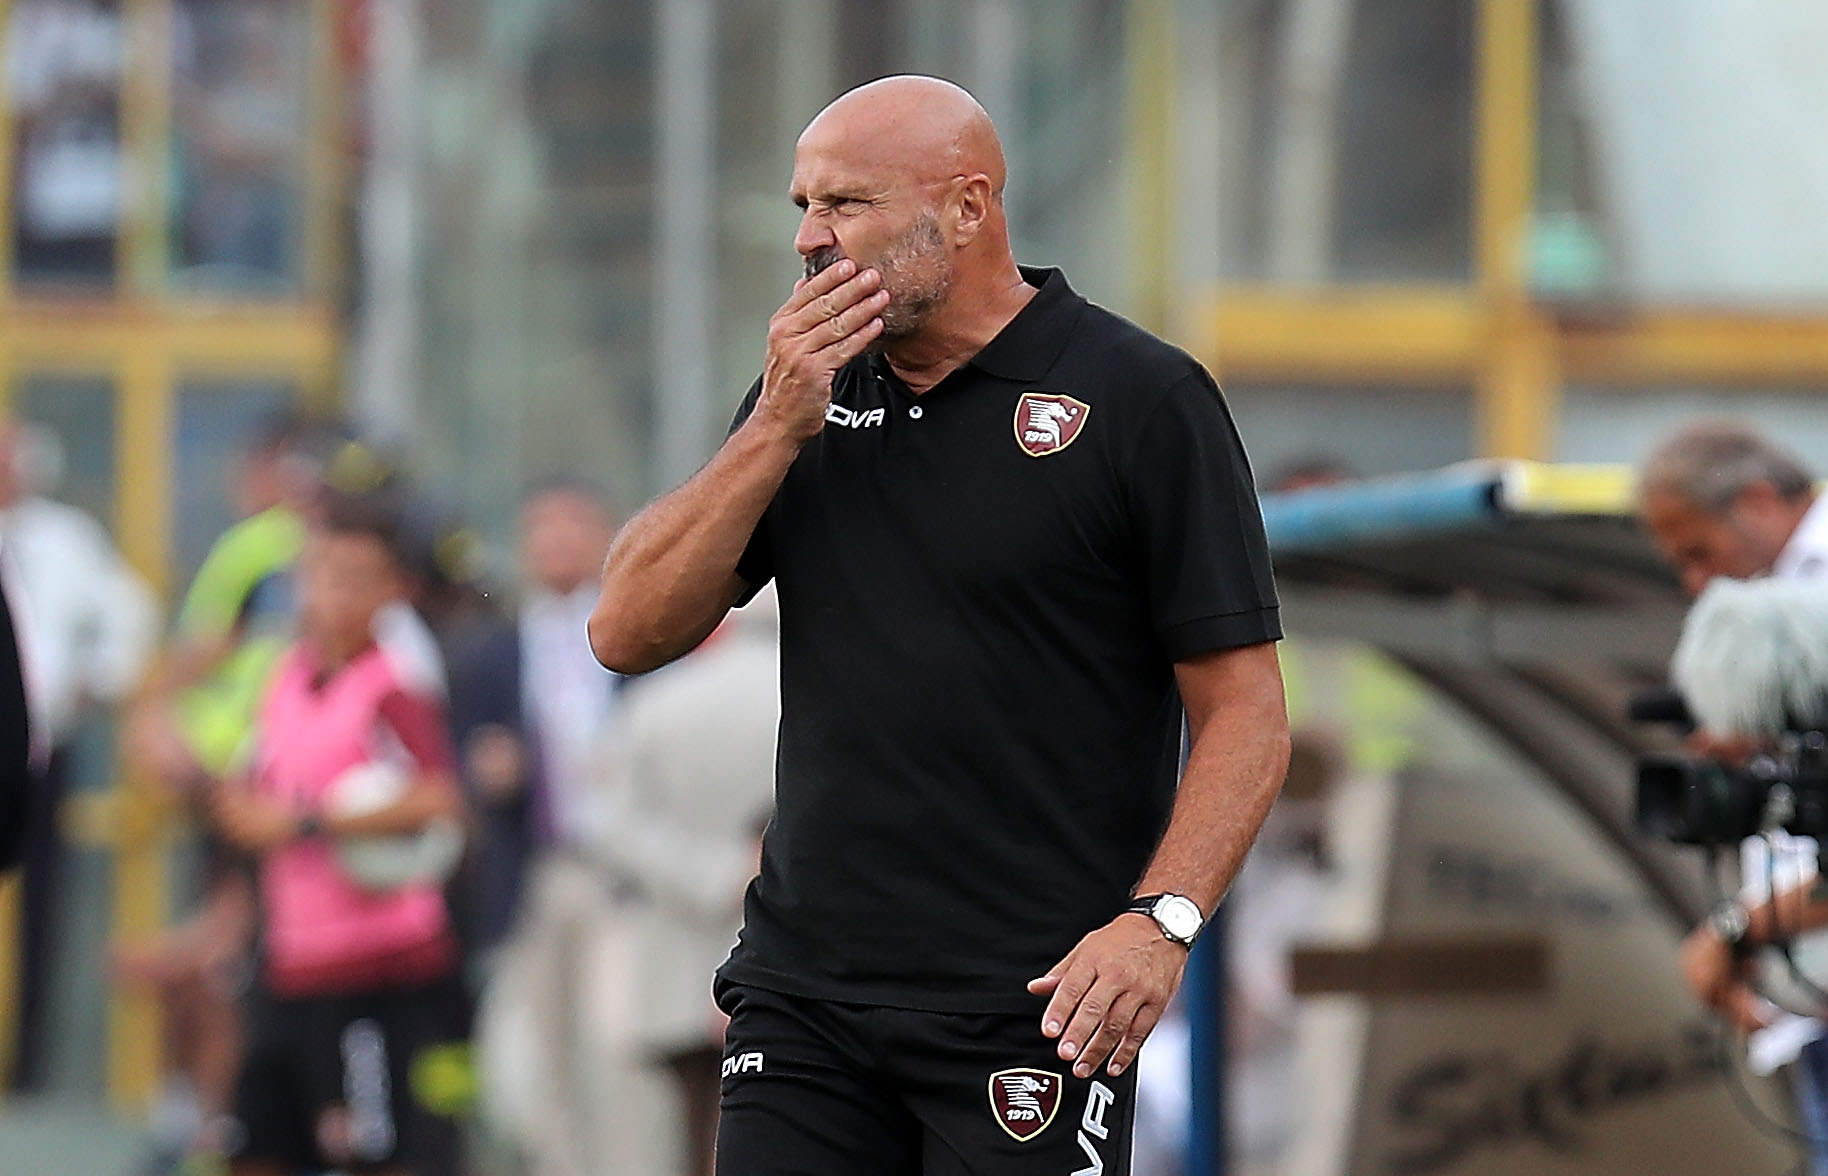 SALERNO, ITALY - AUGUST 25:  Coach of US Salernitana Stefano Colantuono gestures during the Serie B match between US Salernitana and US Citta di Palermo on August 25, 2018 in Salerno, Italy.  (Photo by Francesco Pecoraro/Getty Images)